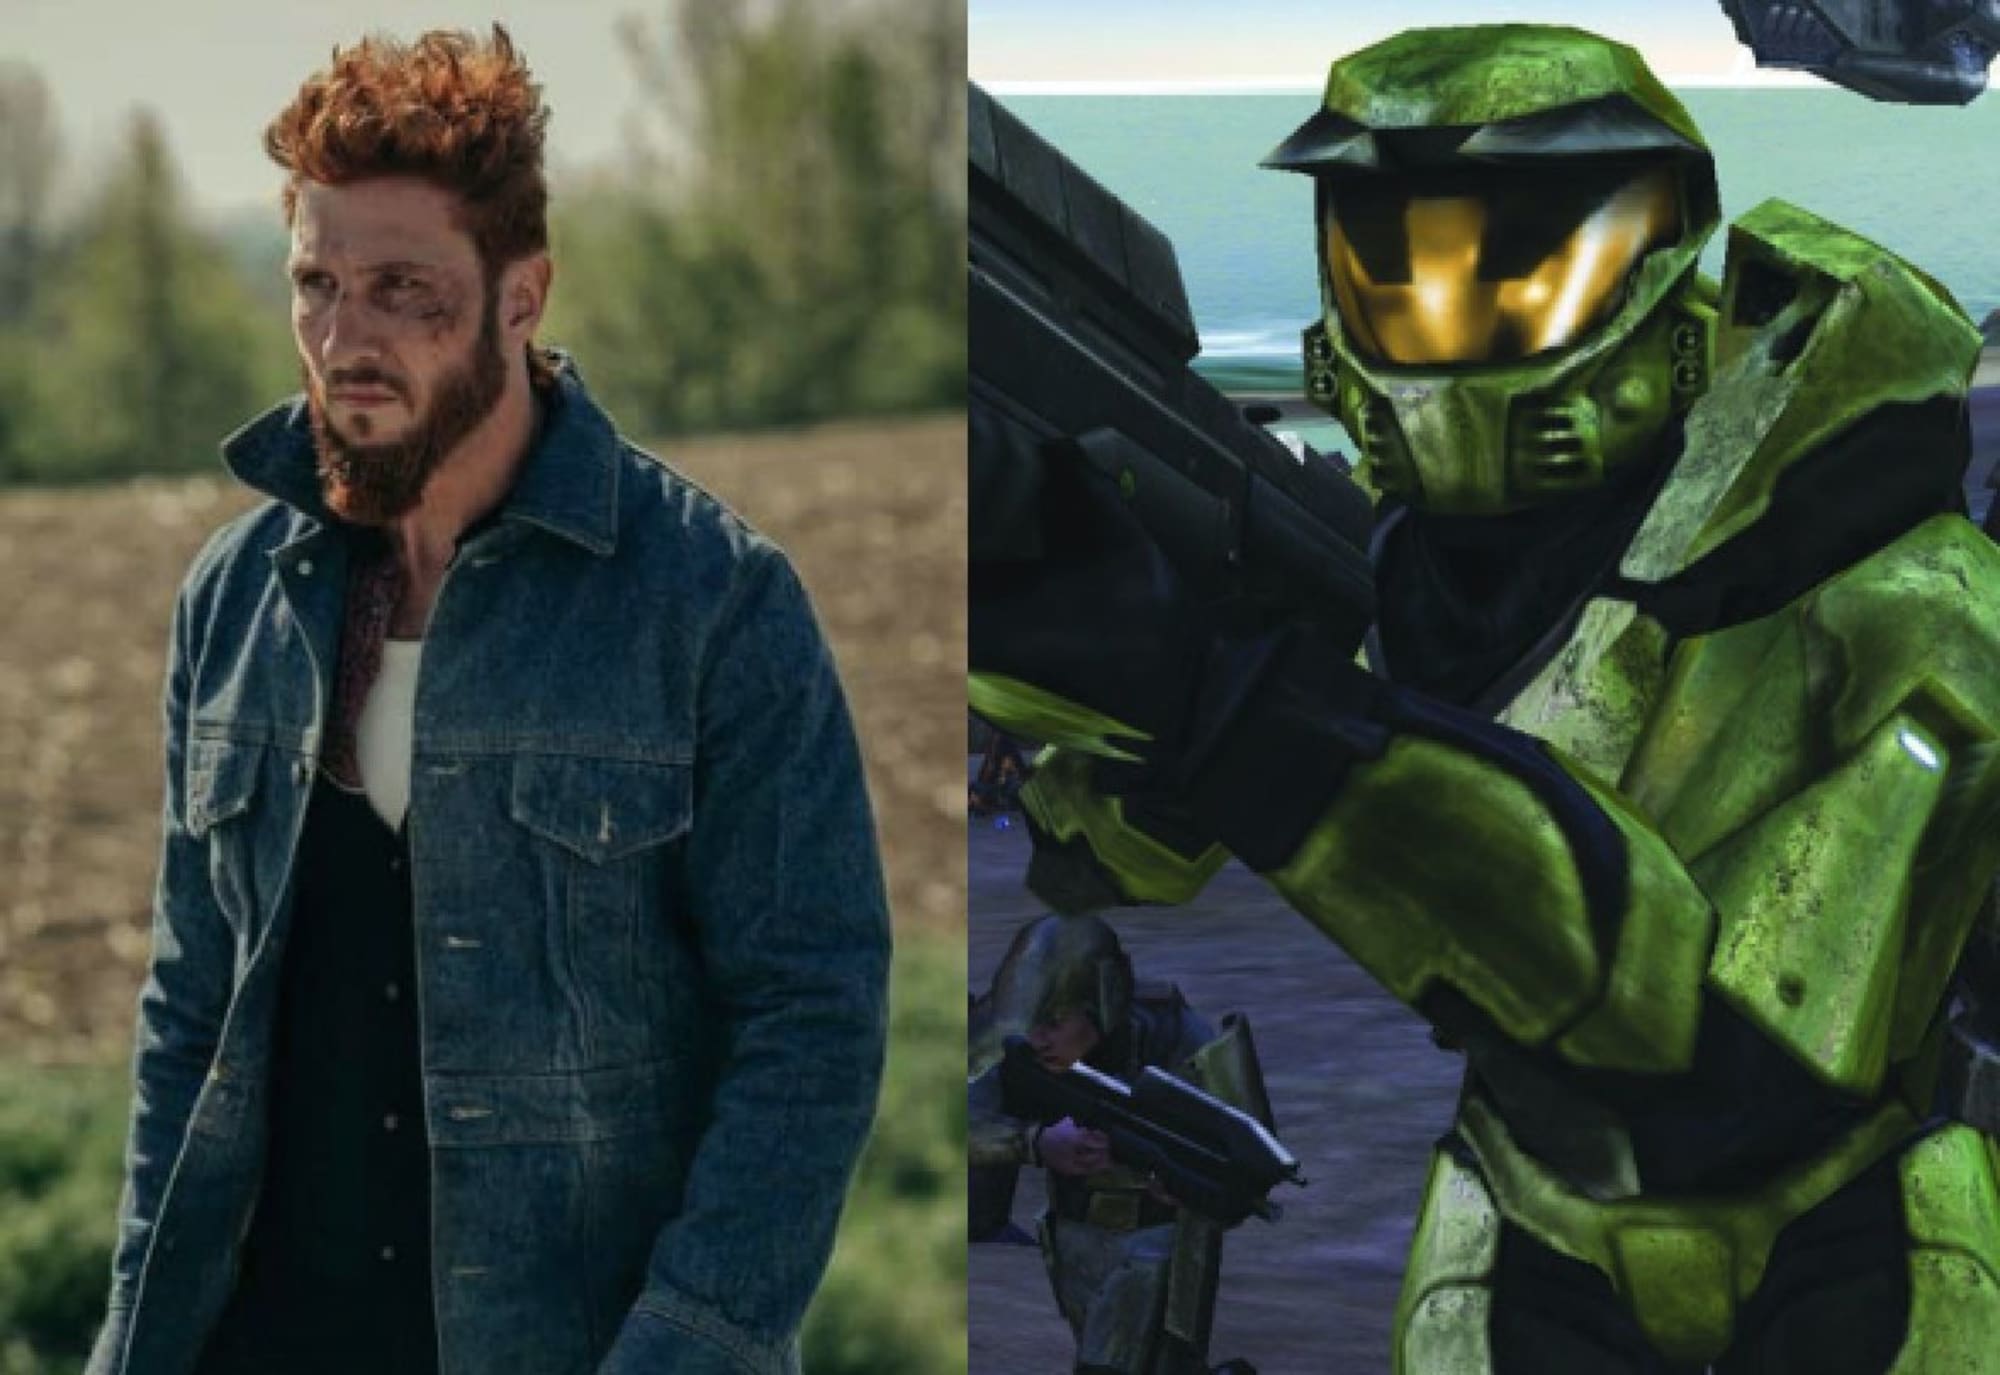 Pablo Schreiber cast as Master Chief in Showtime's Halo show